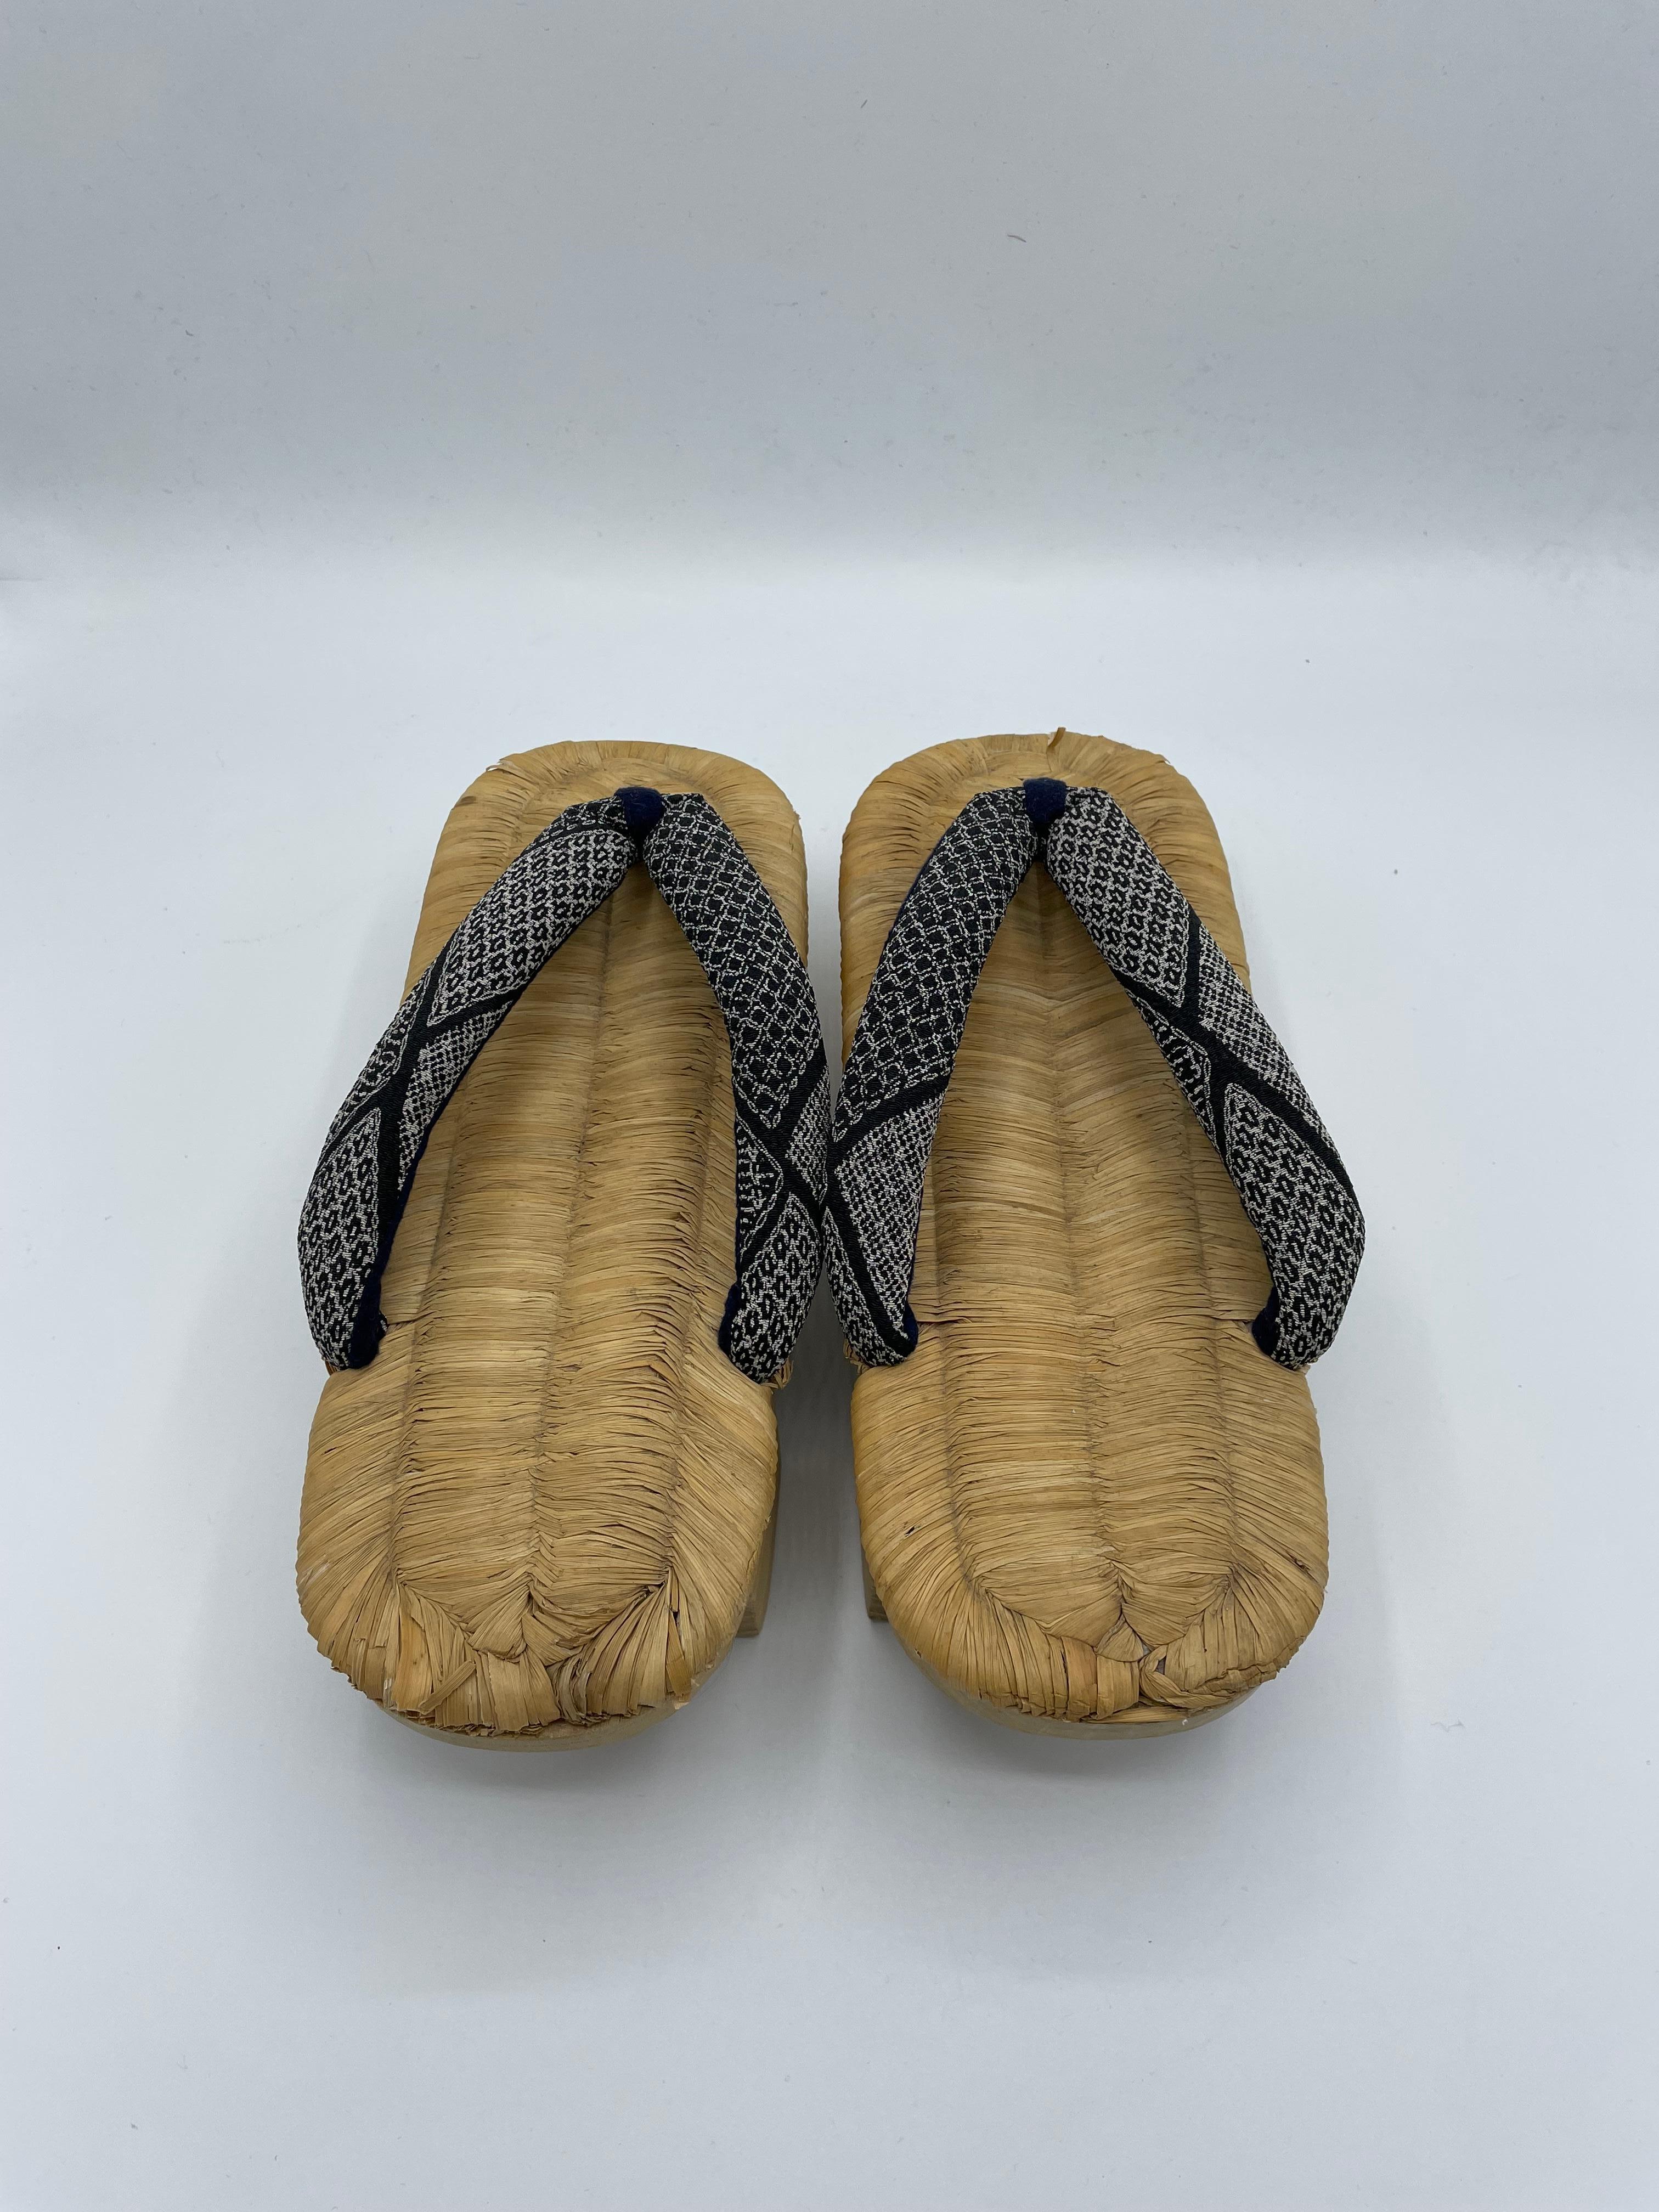 This is one pair of a sandals which is made around 1950s in Japan.
This is made with a paulownia wood which grow in Aizu town in Japan, it is called Aizu Kiri and it is regarded to have the best quality in Japan for its firmness and close grain.